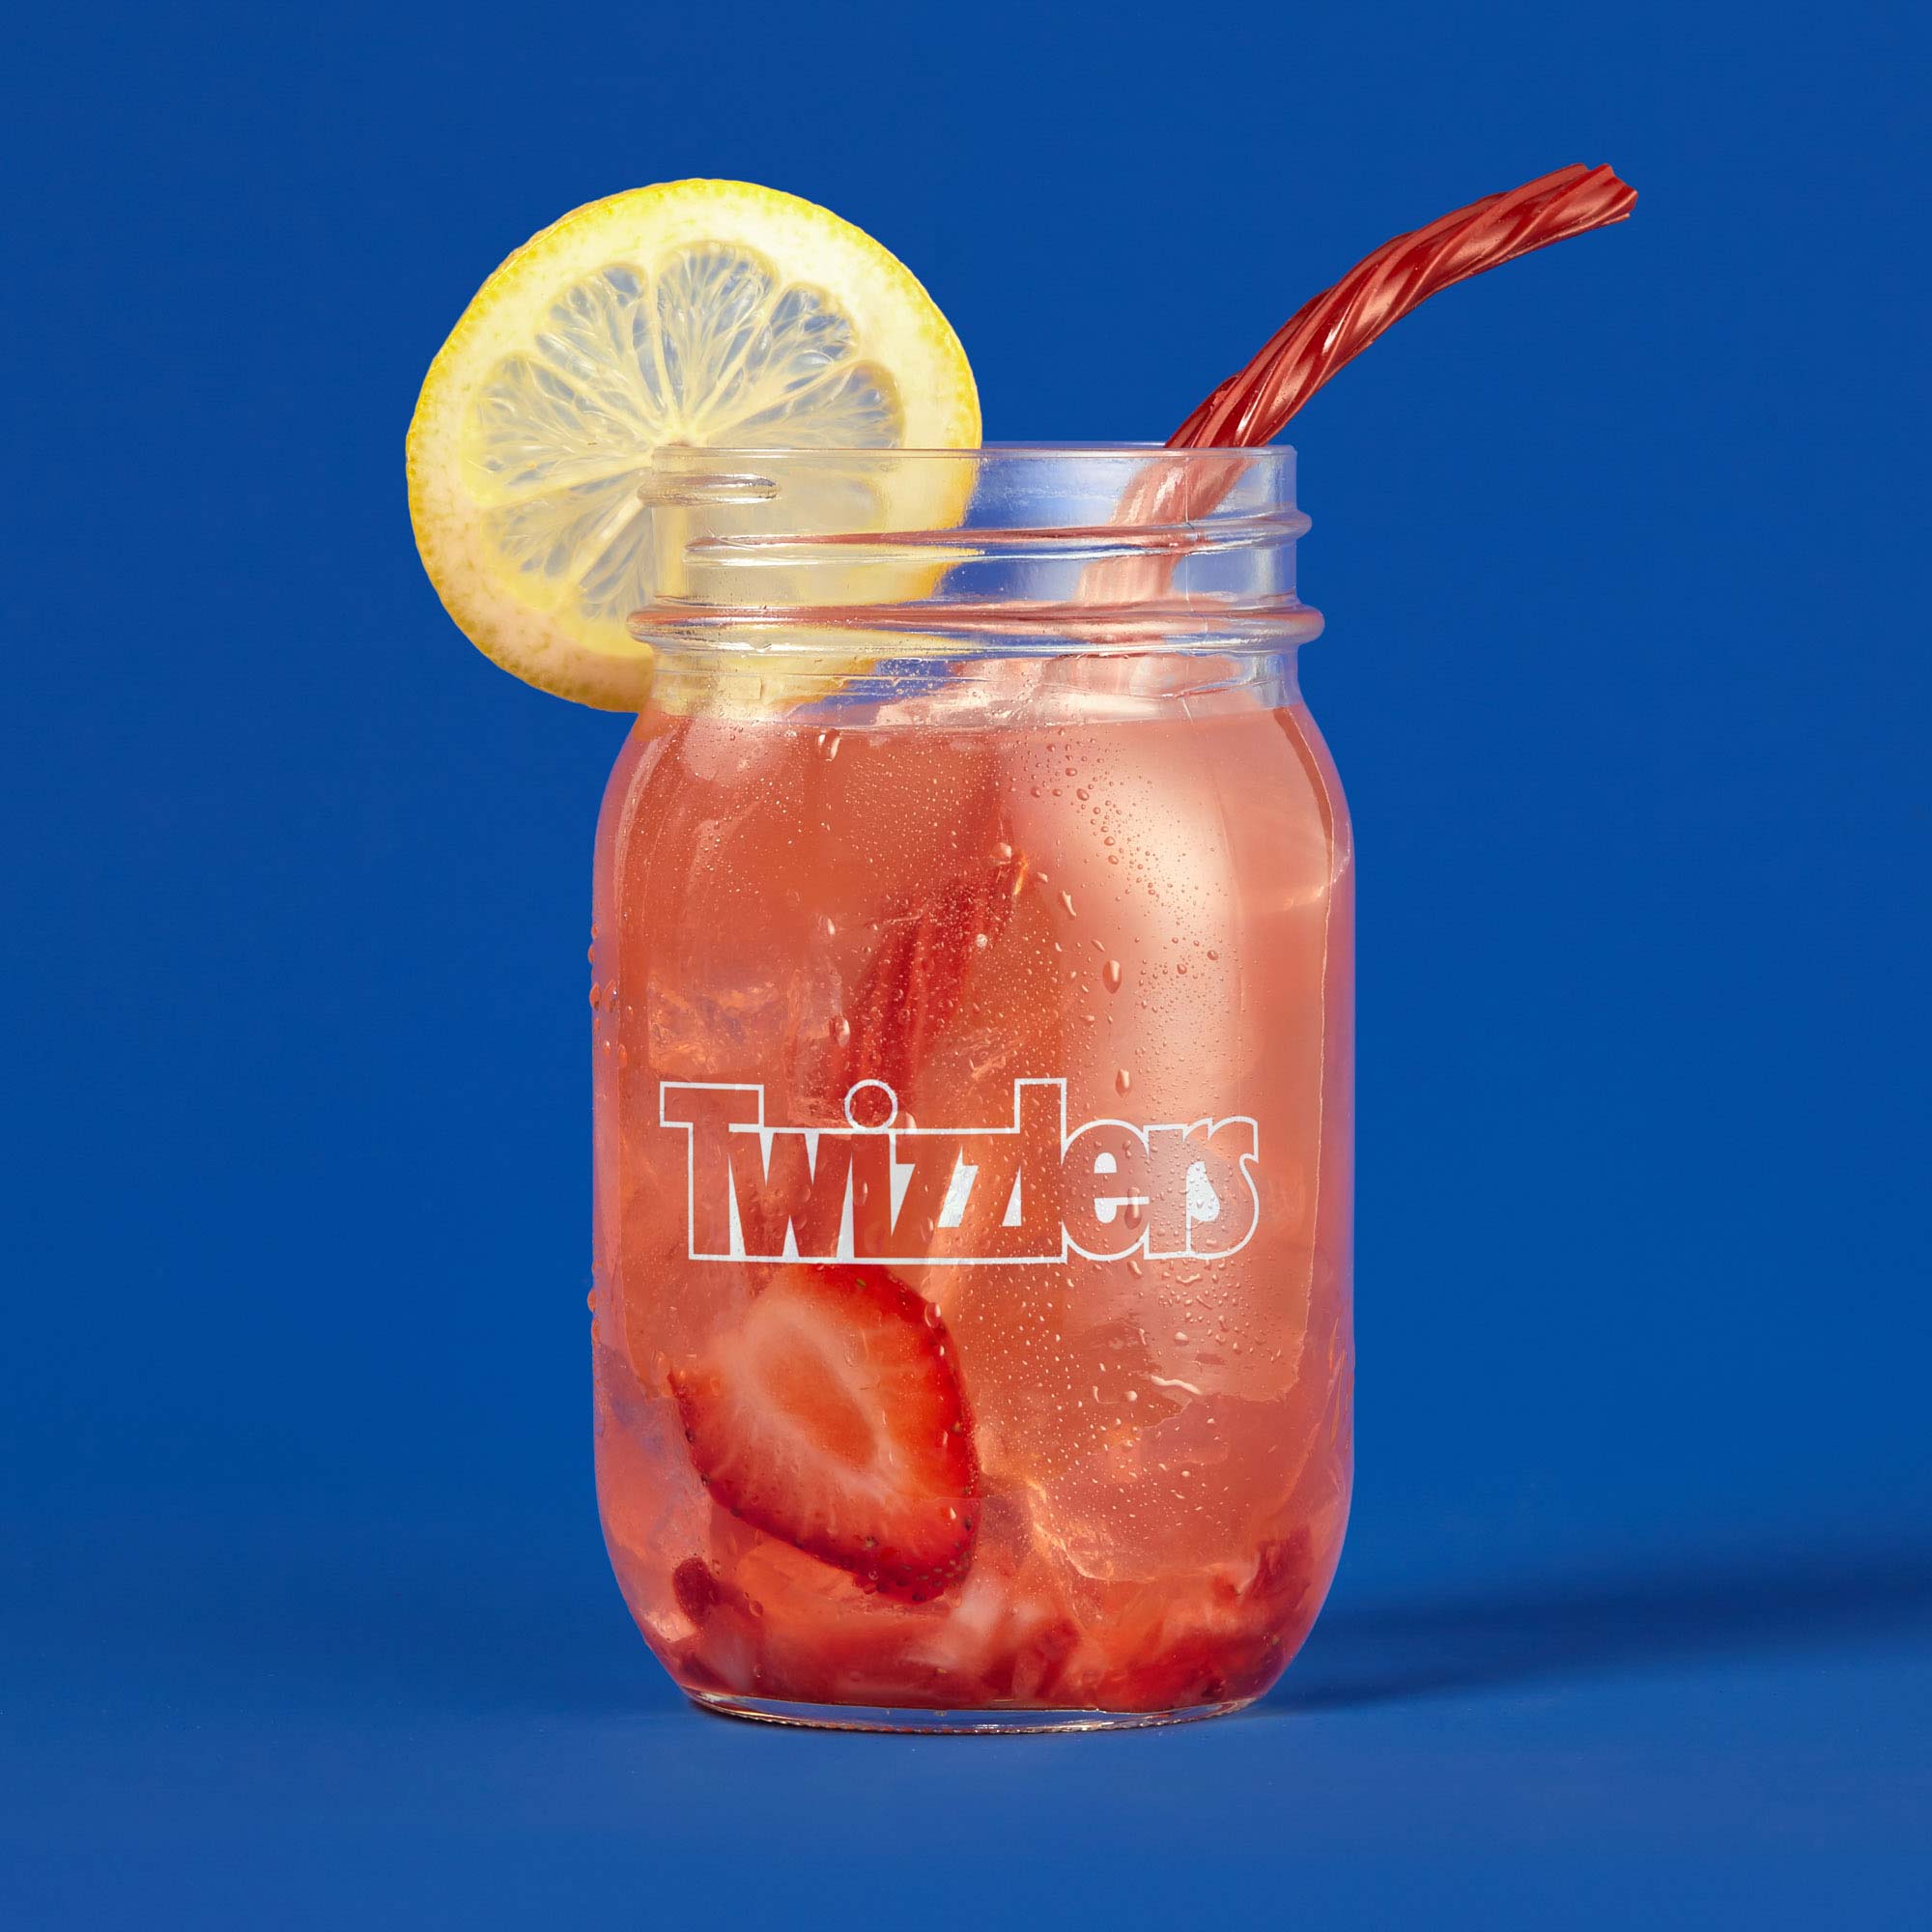 Twizzlers straw in pink lemonade on blue background | Food Photography | Studio Photography | Social | Still Life Photography shot in Boulder, Colorado for Crispin Porter + Bogusky